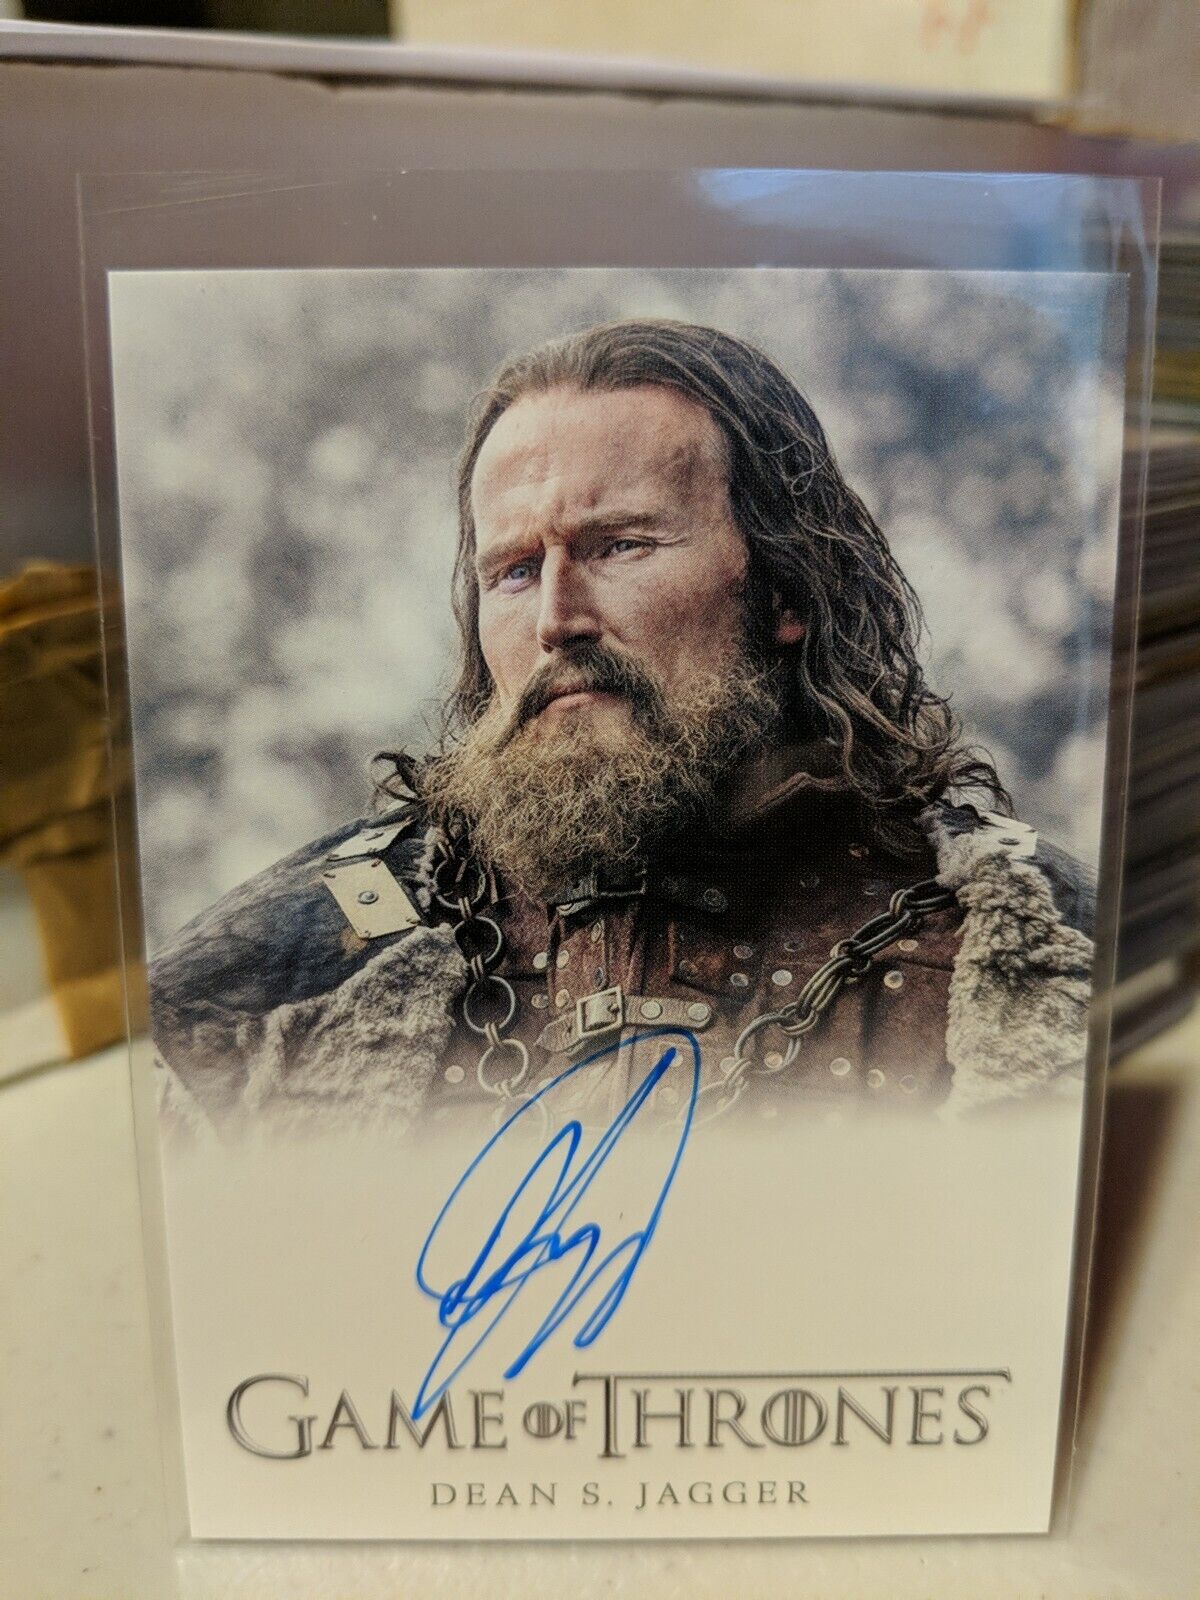 Game Of Thrones Complete Series Vol 2 Dean S. Jagger Autograph Card Full-bleed L